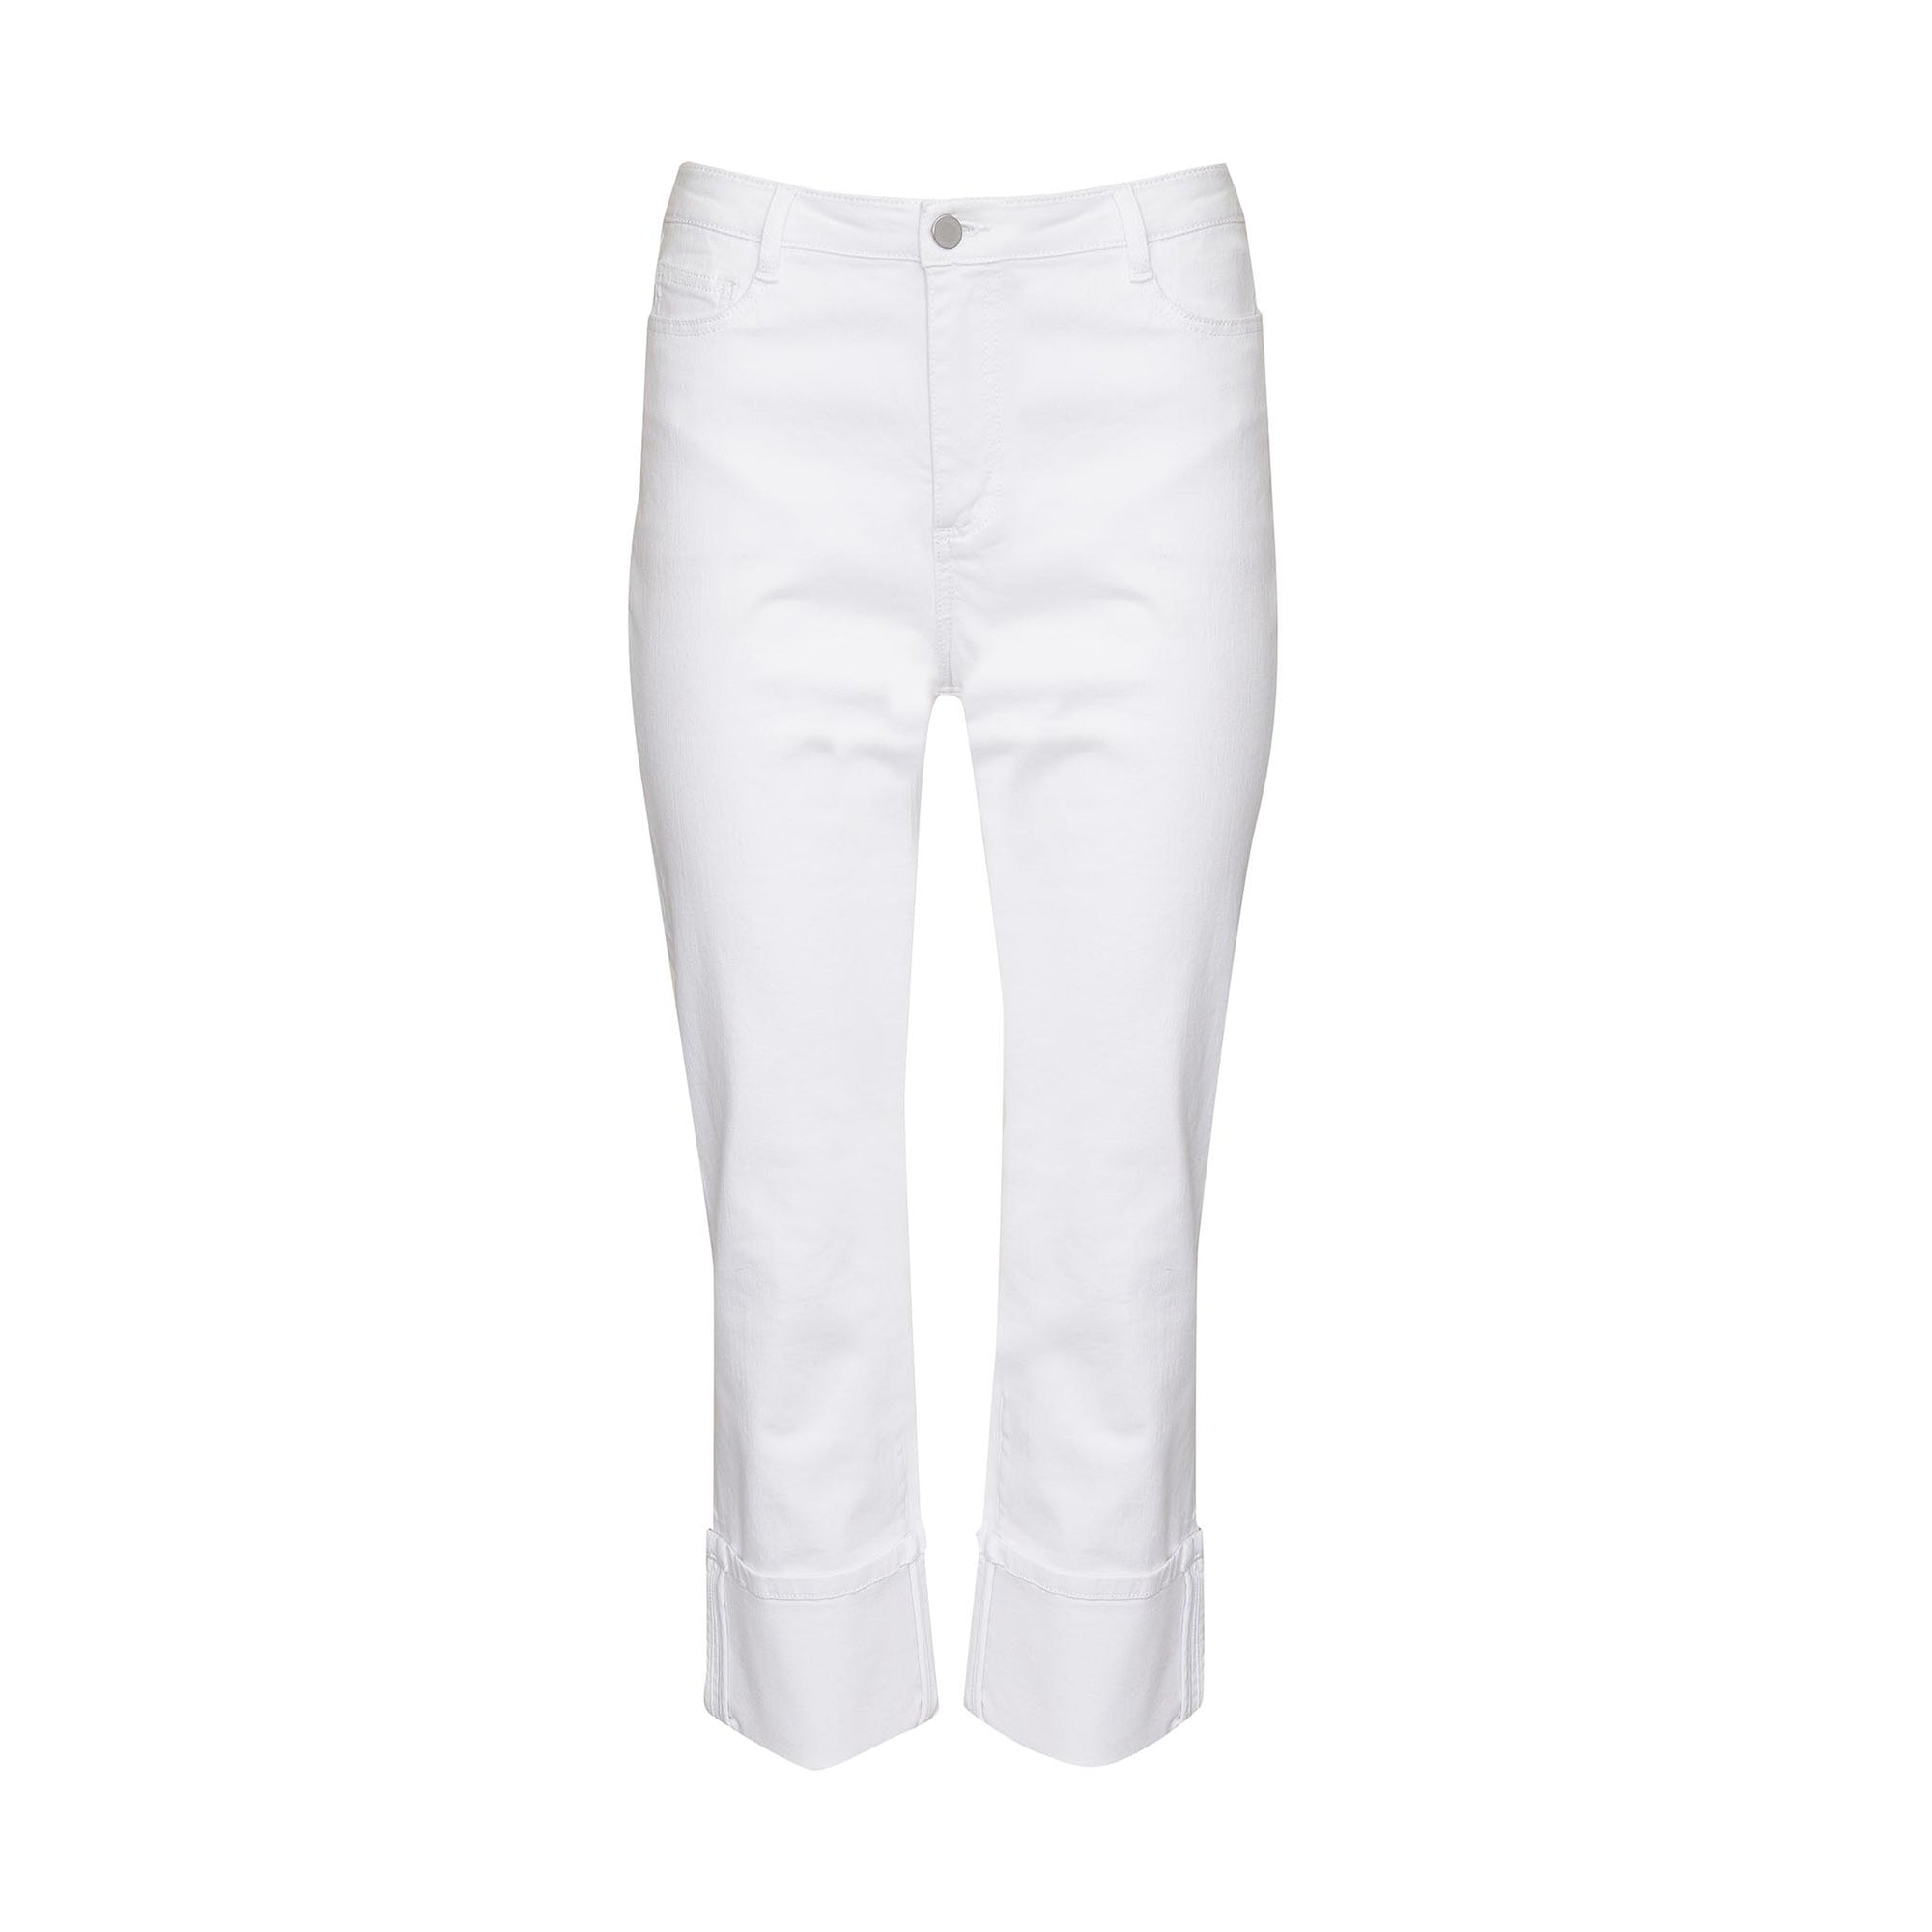 white, pant, cuffed jeans, mid rise jean, straight cut, product image